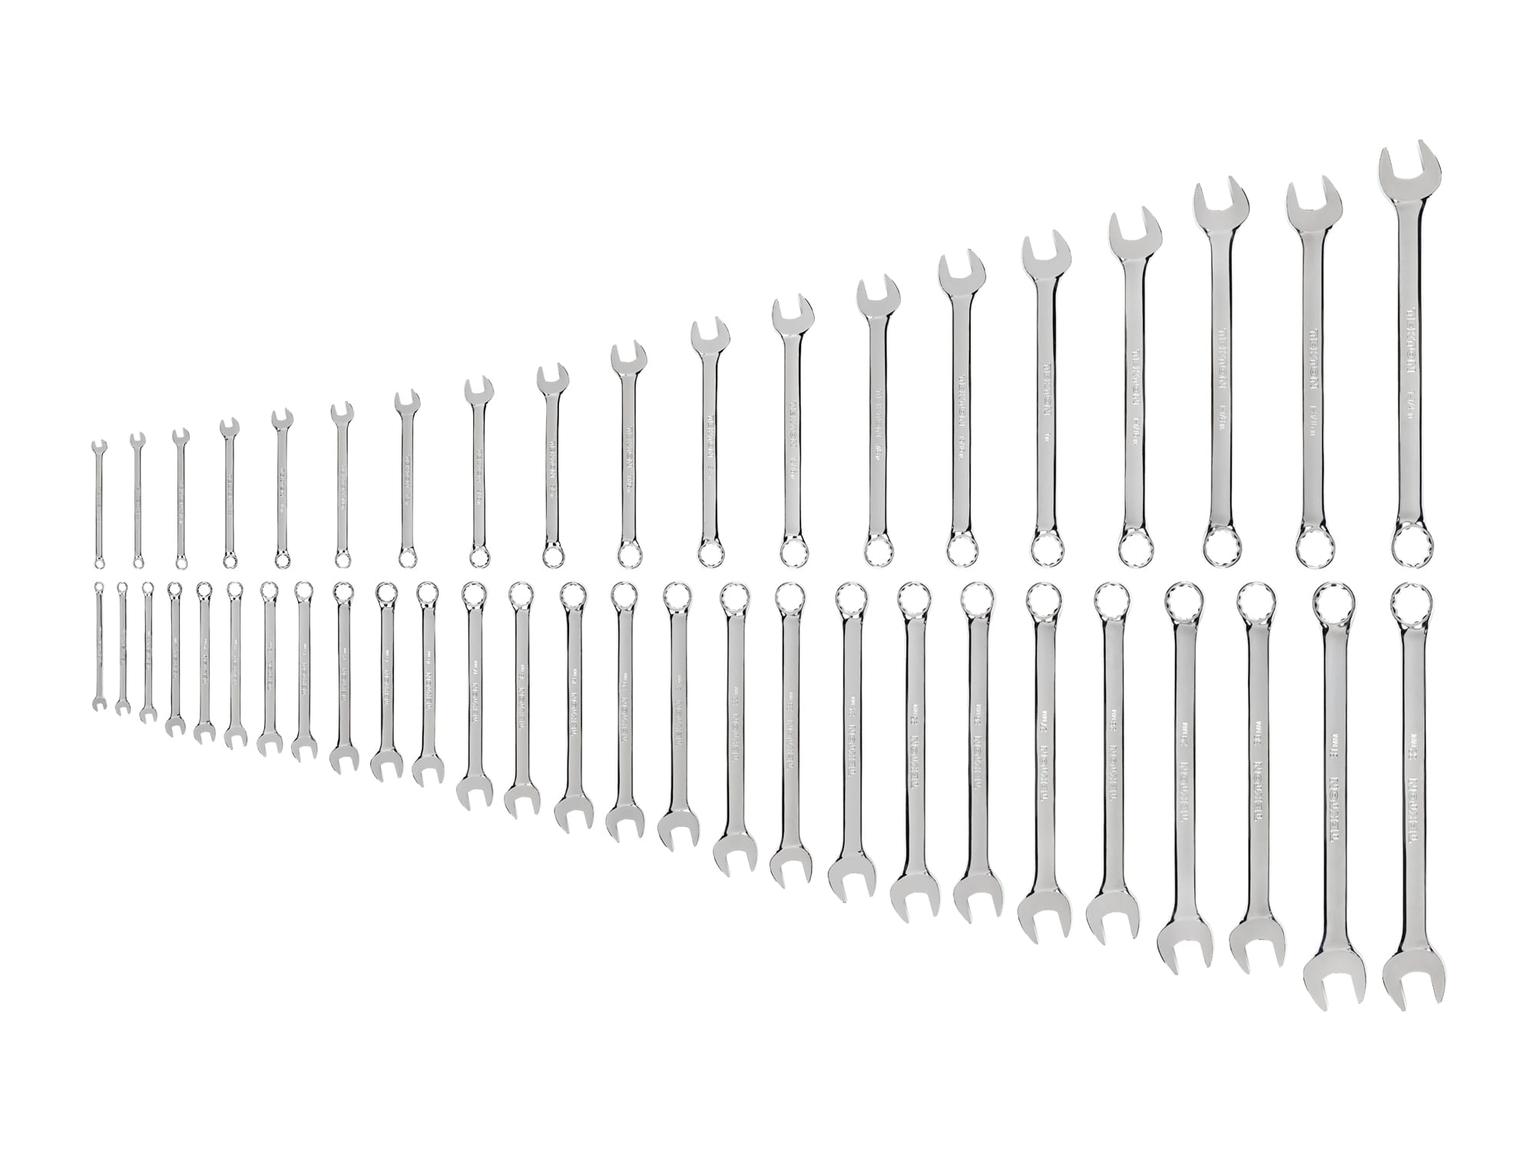 Combination Wrench Set, 46-Piece (1/4 - 1-1/4 in., 6-32 mm)